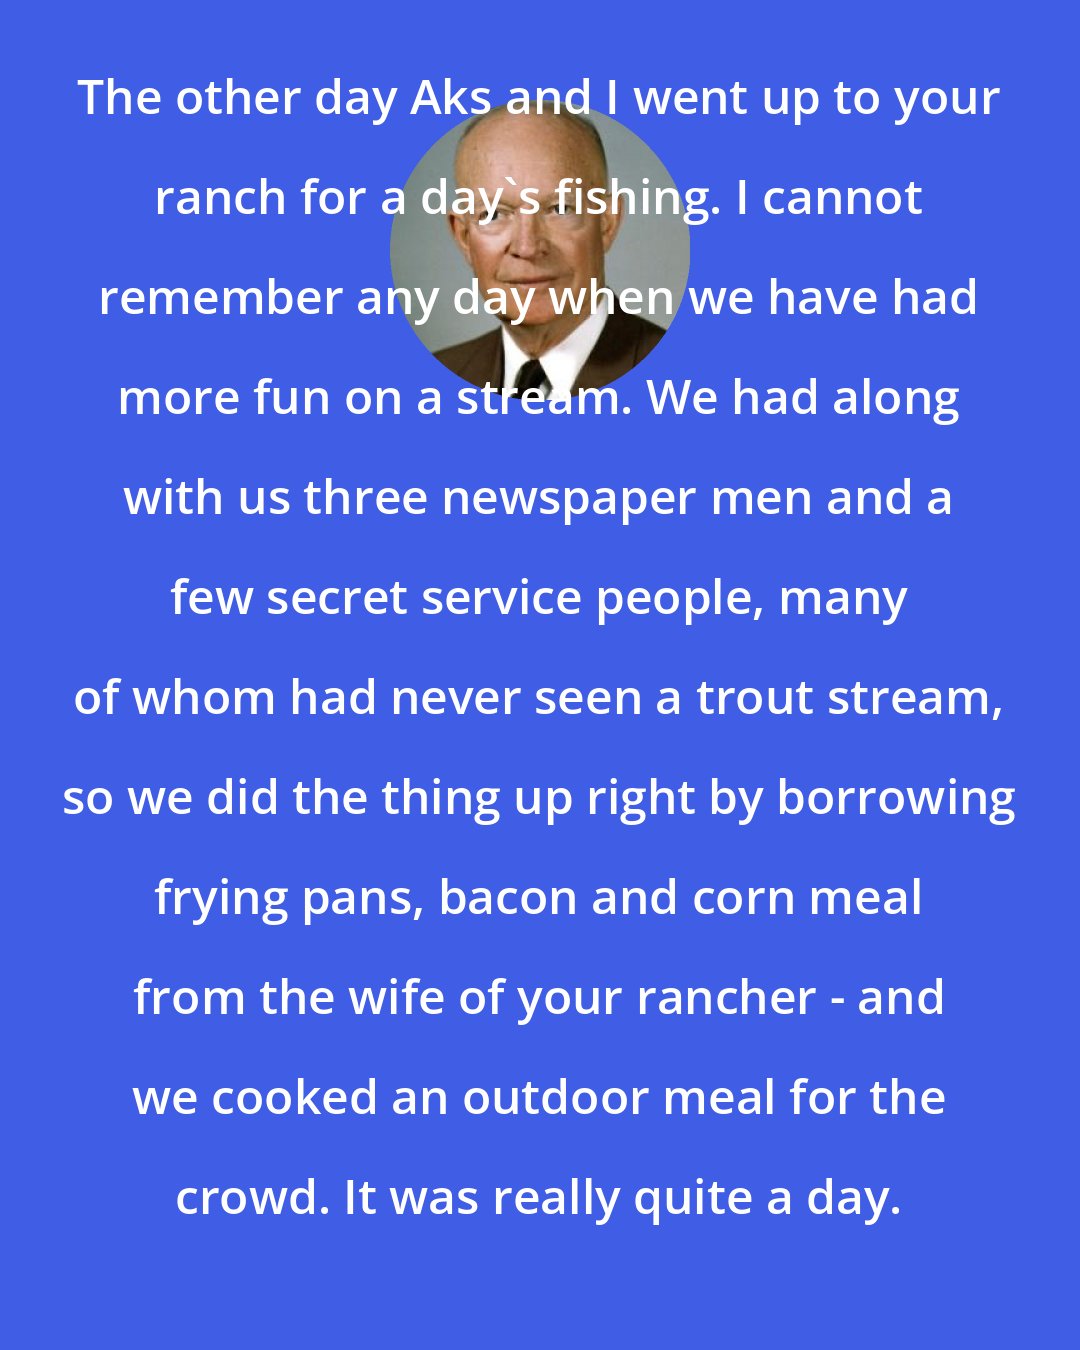 Dwight D. Eisenhower: The other day Aks and I went up to your ranch for a day's fishing. I cannot remember any day when we have had more fun on a stream. We had along with us three newspaper men and a few secret service people, many of whom had never seen a trout stream, so we did the thing up right by borrowing frying pans, bacon and corn meal from the wife of your rancher - and we cooked an outdoor meal for the crowd. It was really quite a day.